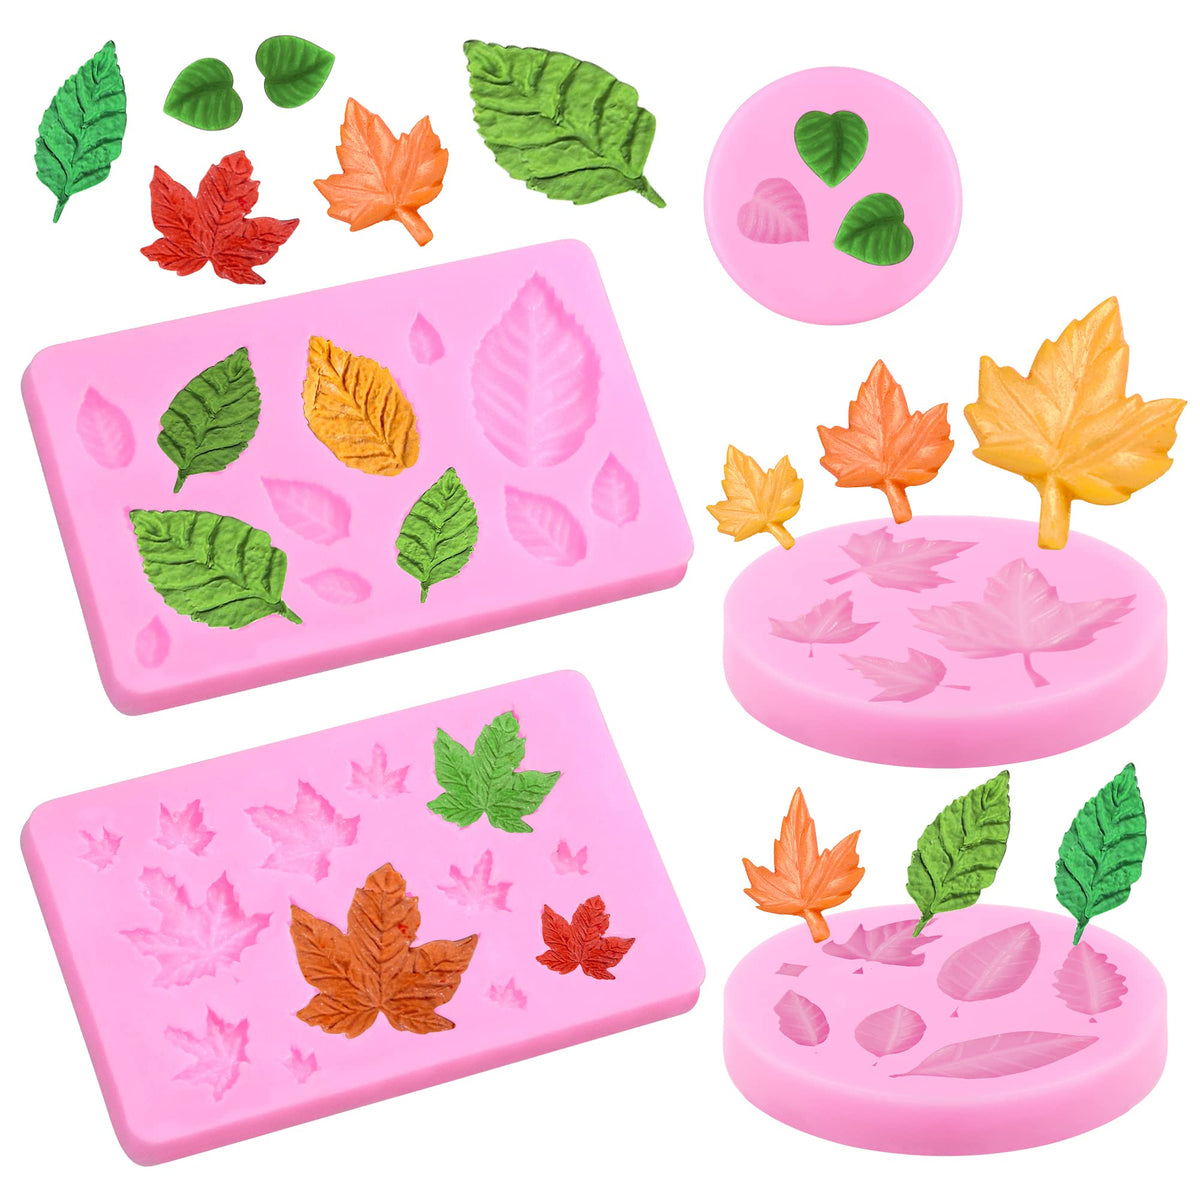 QWY Christmas Tree Cake Pan 3D Silicone Christmas Baking Molds for